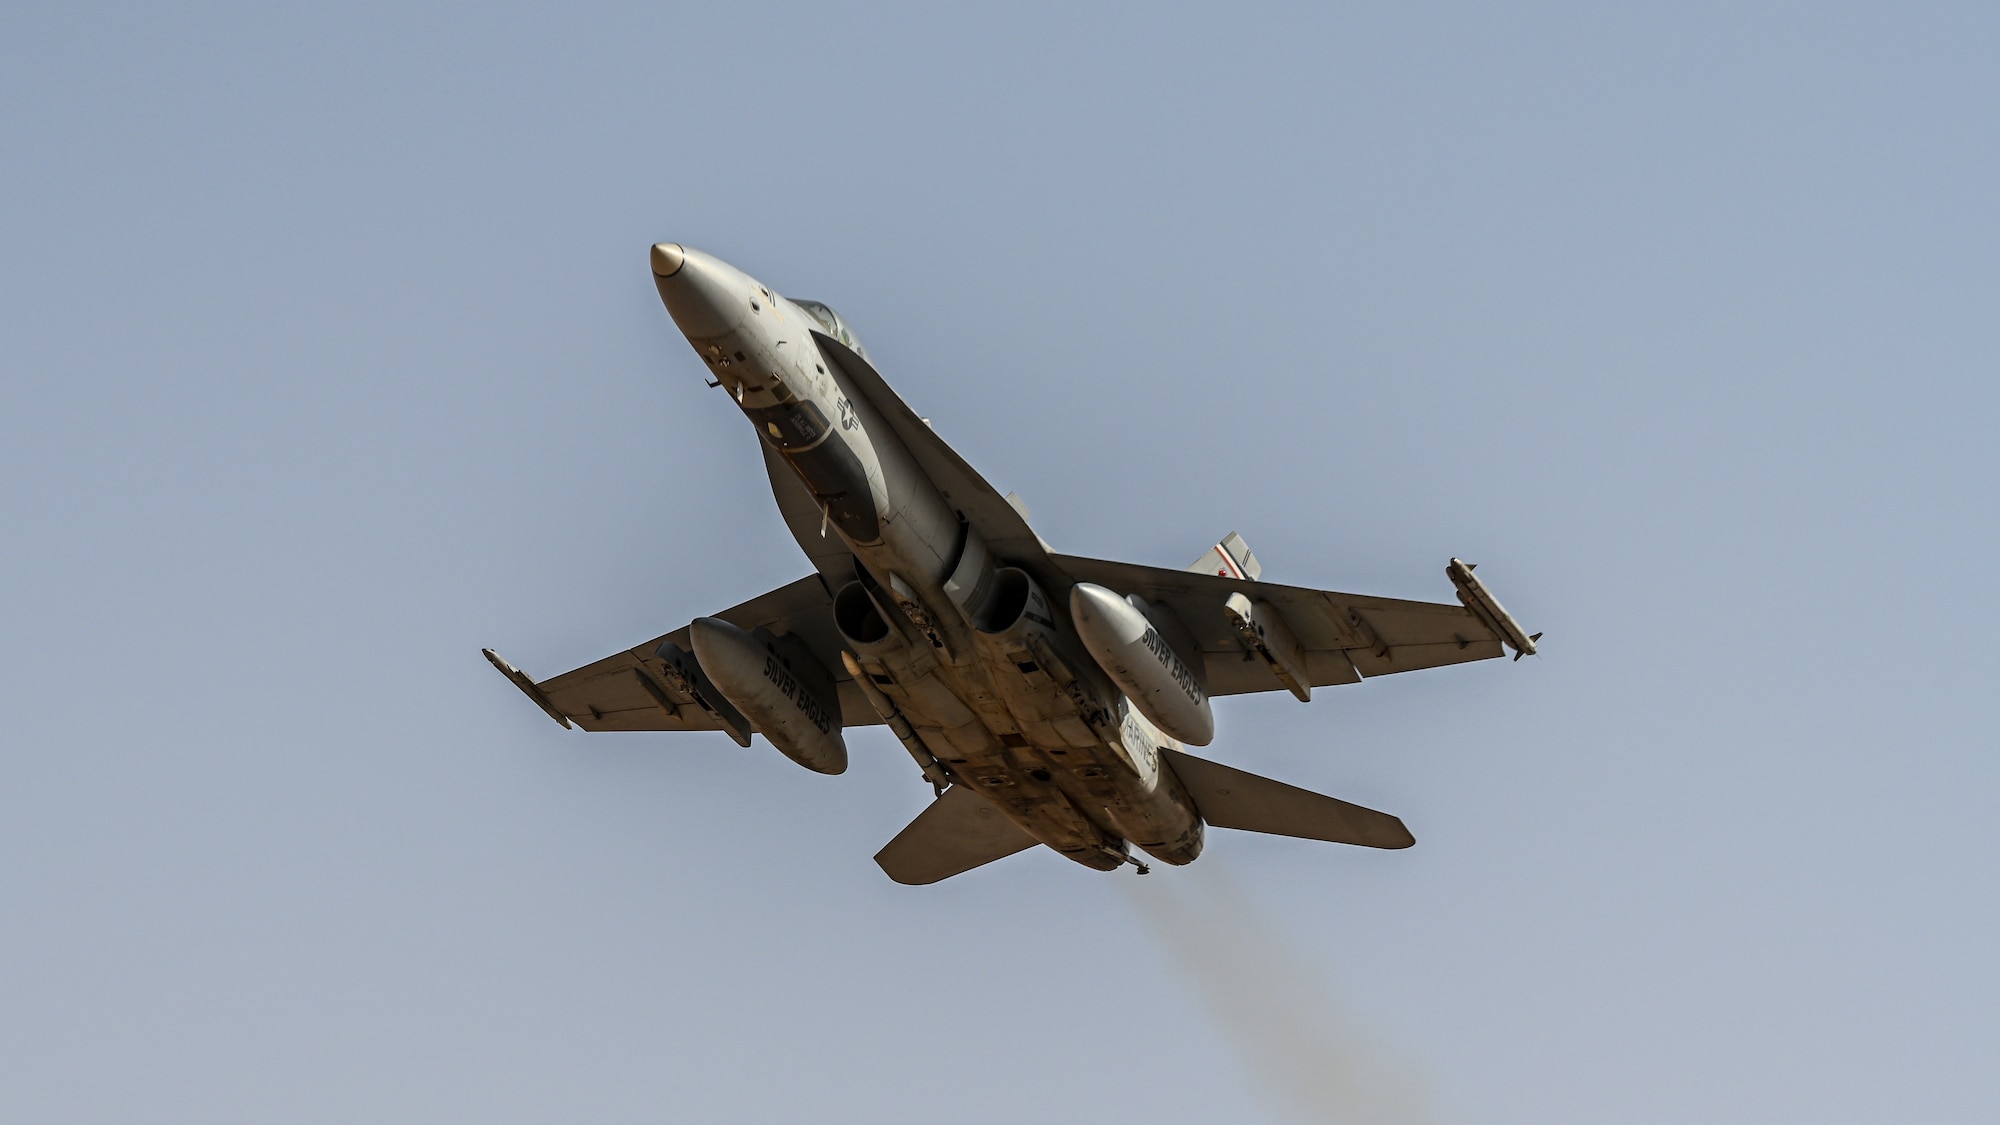 A U.S. Marine F/A-18 Hornet assigned to the Marine Fighter Attack Squadron 115 takes off from Prince Sultan Air Base, Kingdom of Saudi Arabia, Jan. 25, 2022. The F/A-18 is a twin-engine, supersonic, all-weather, carrier-capable, multirole combat jet, designed as both a fighter and attack aircraft. (U.S. Air Force photo by Staff Sgt. Christina A. Graves)